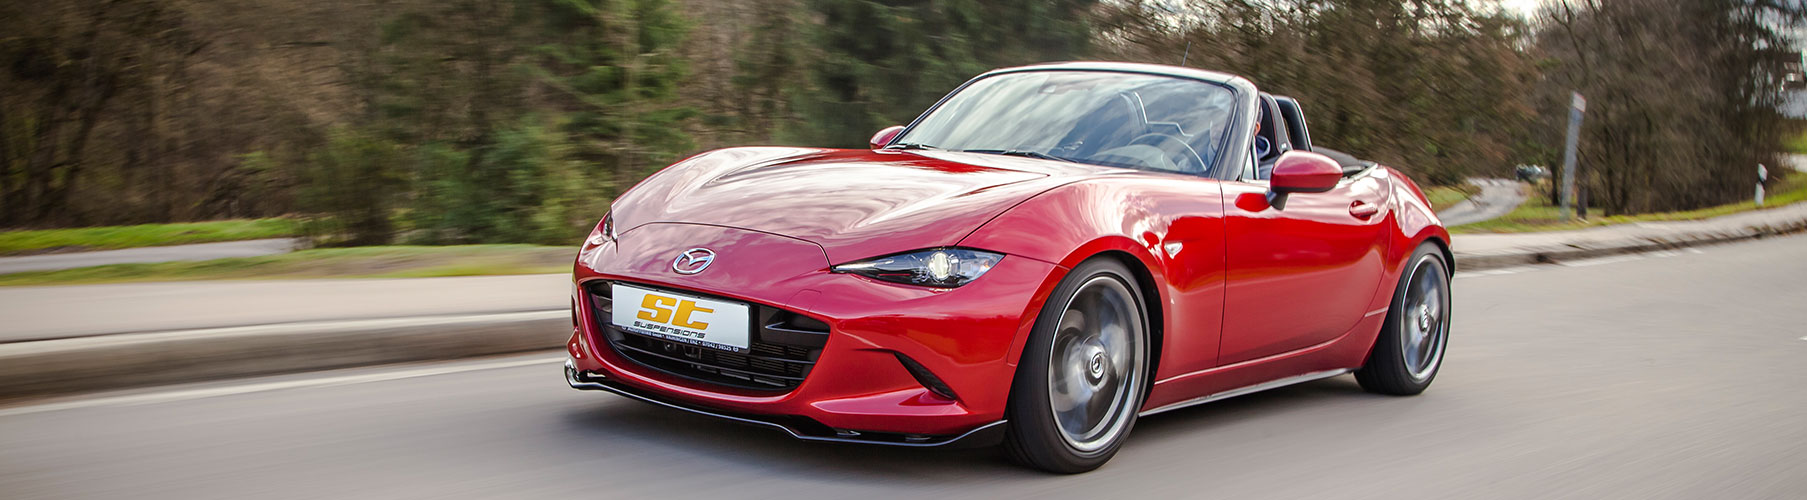 Upgrade your Joyride: Mazda MX-5 (ND) lowered with a coilover kit from ST suspensions